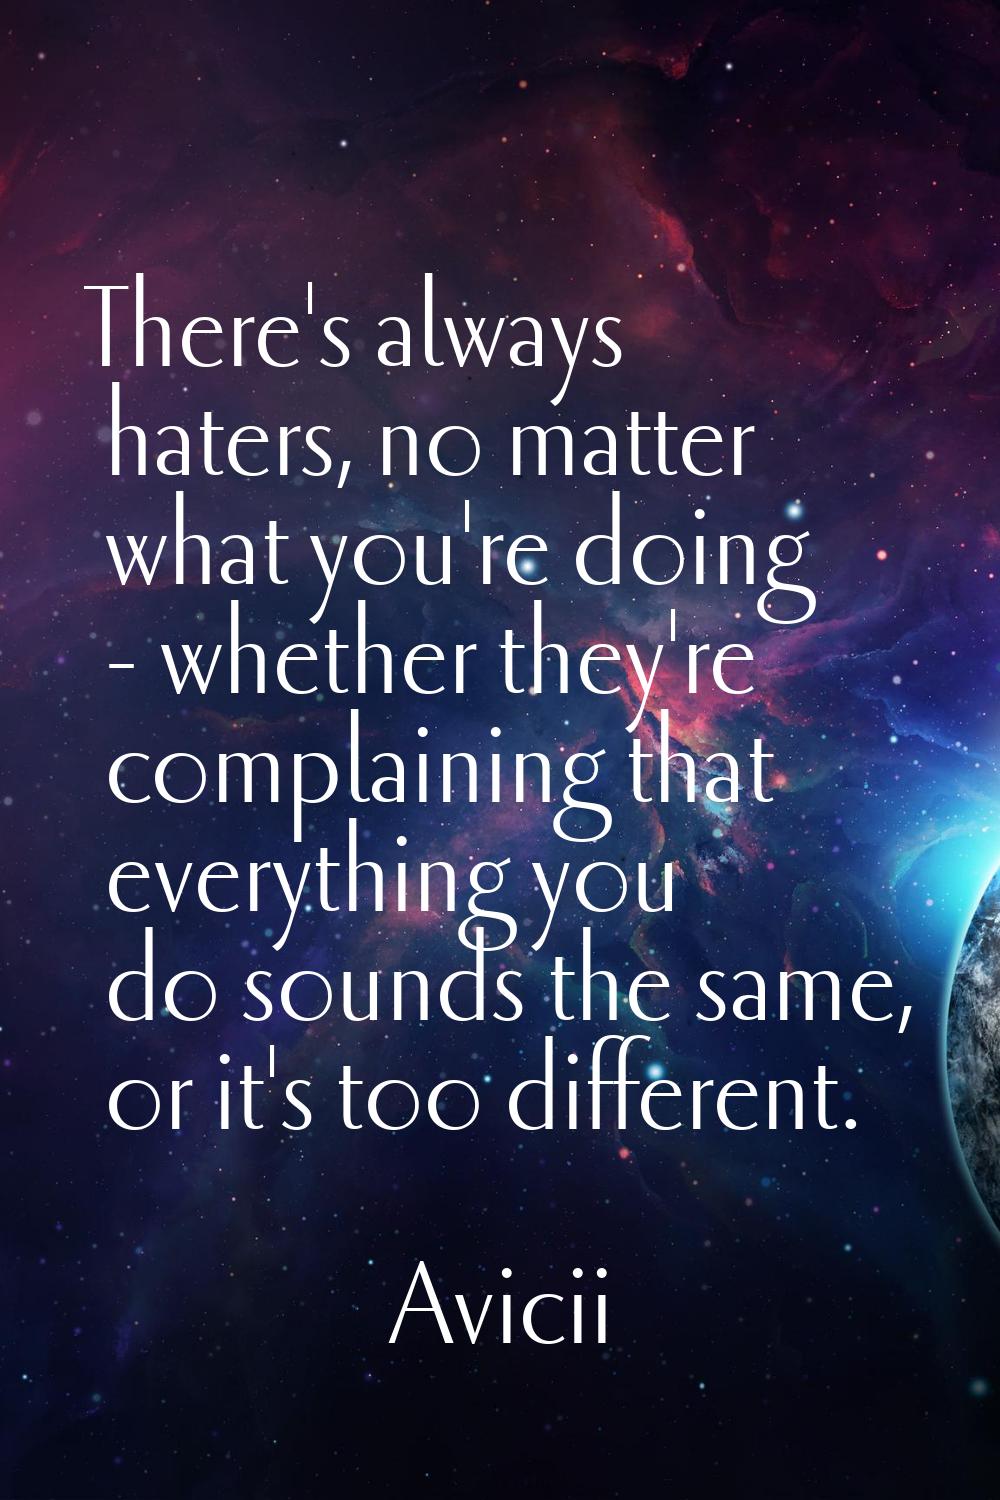 There's always haters, no matter what you're doing - whether they're complaining that everything yo